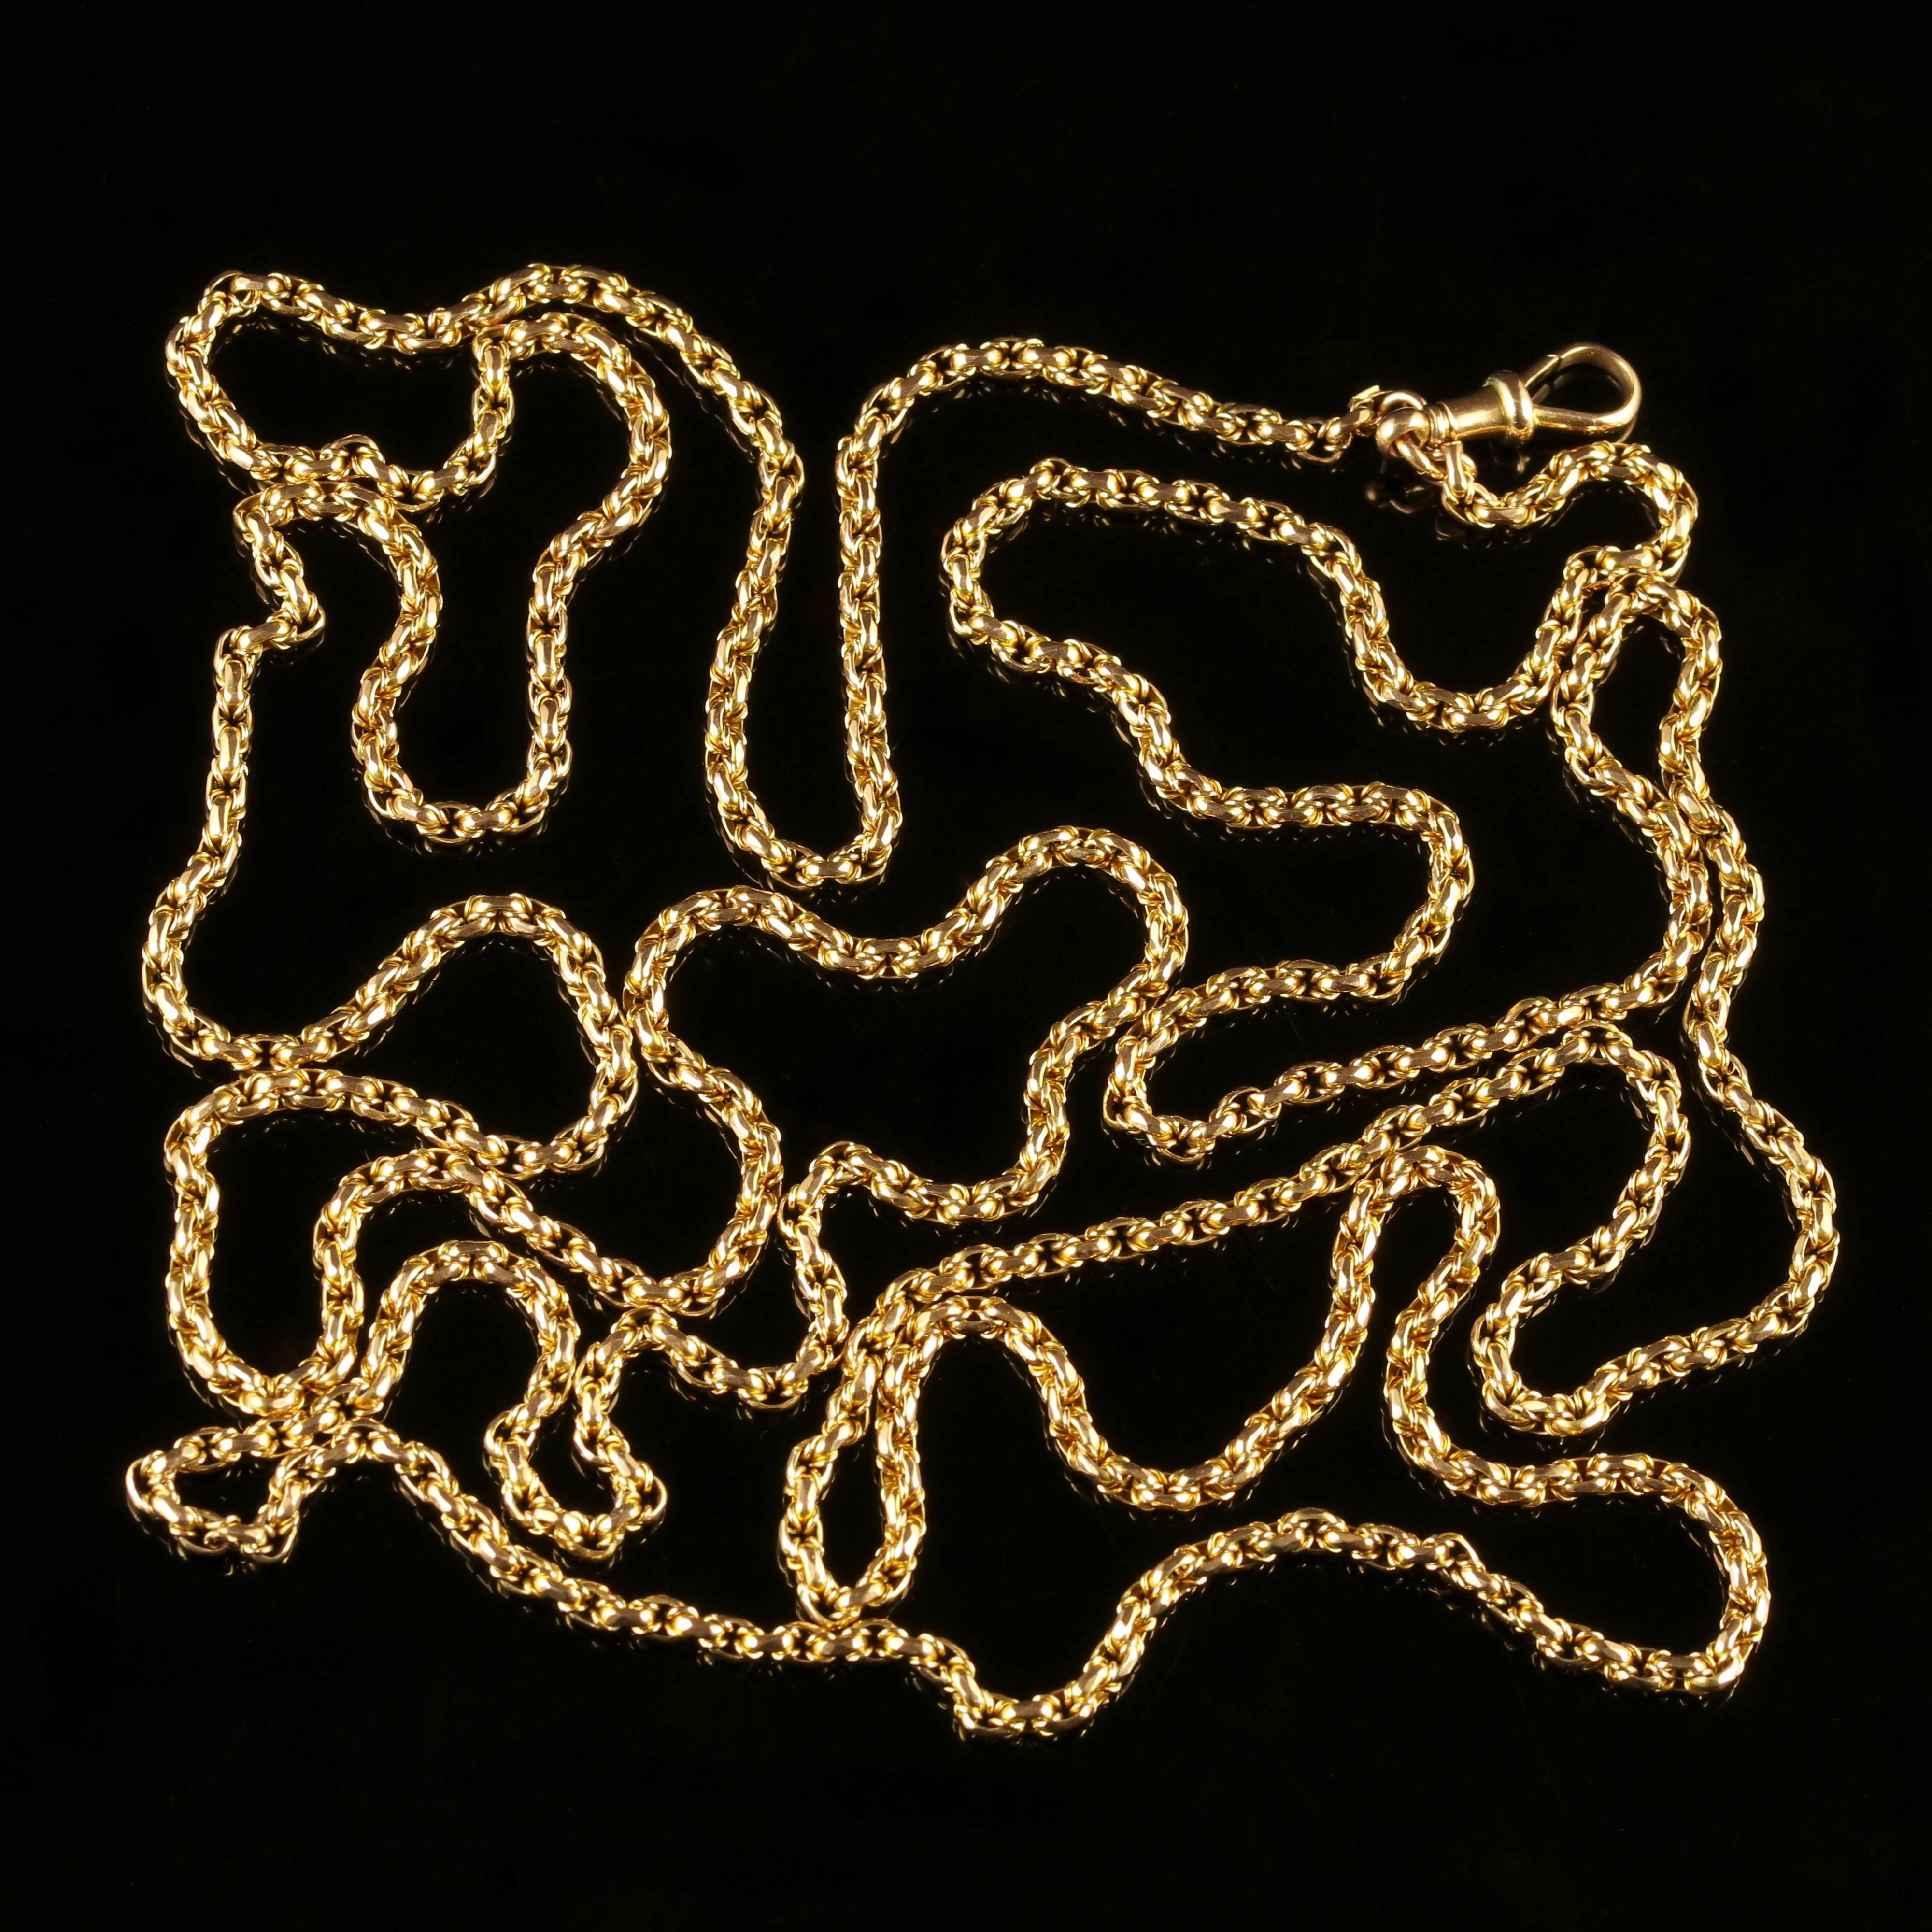 This genuine Victorian long solid Gold guard chain is fabulous.

A genuine Victorian piece, Circa 1900.

These used to be known as muff chains which were a long chain worn around the neck and fastened to a Muff - a cylinder of fur used to keep the